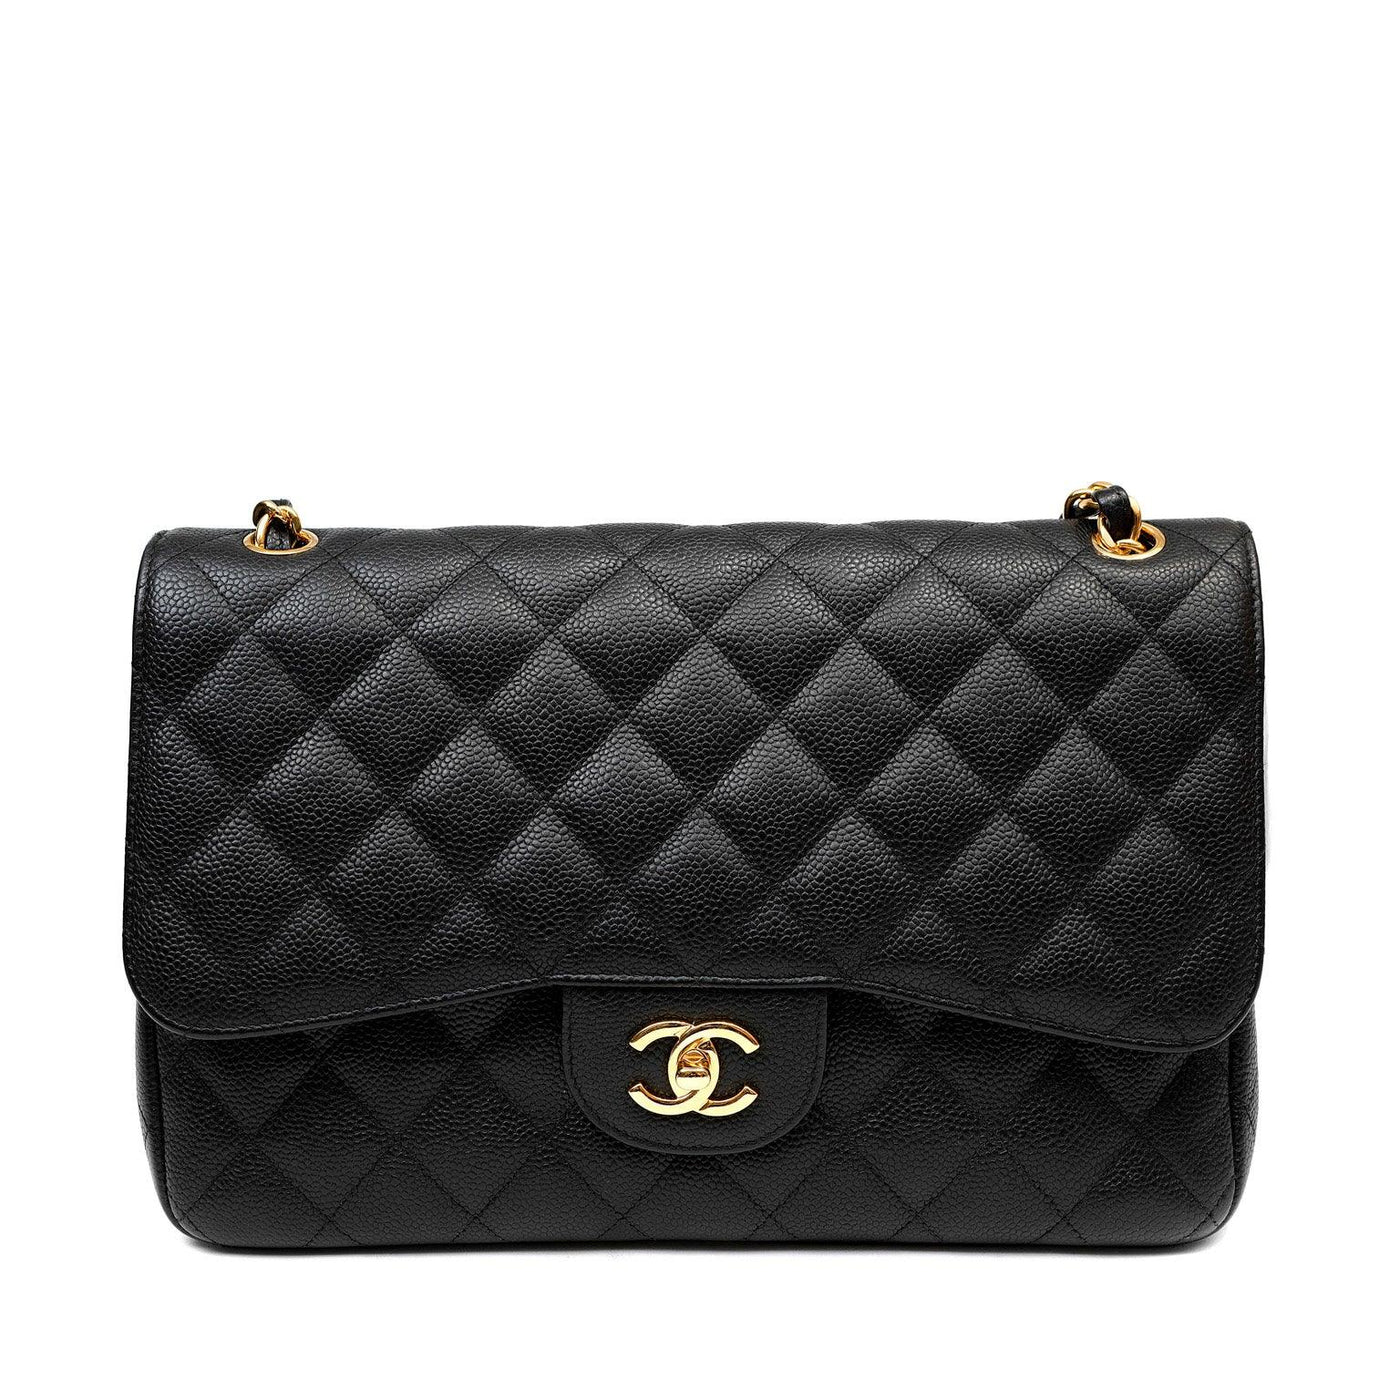 Chanel Black Caviar Jumbo Classic with Gold Hardware - Only Authentics